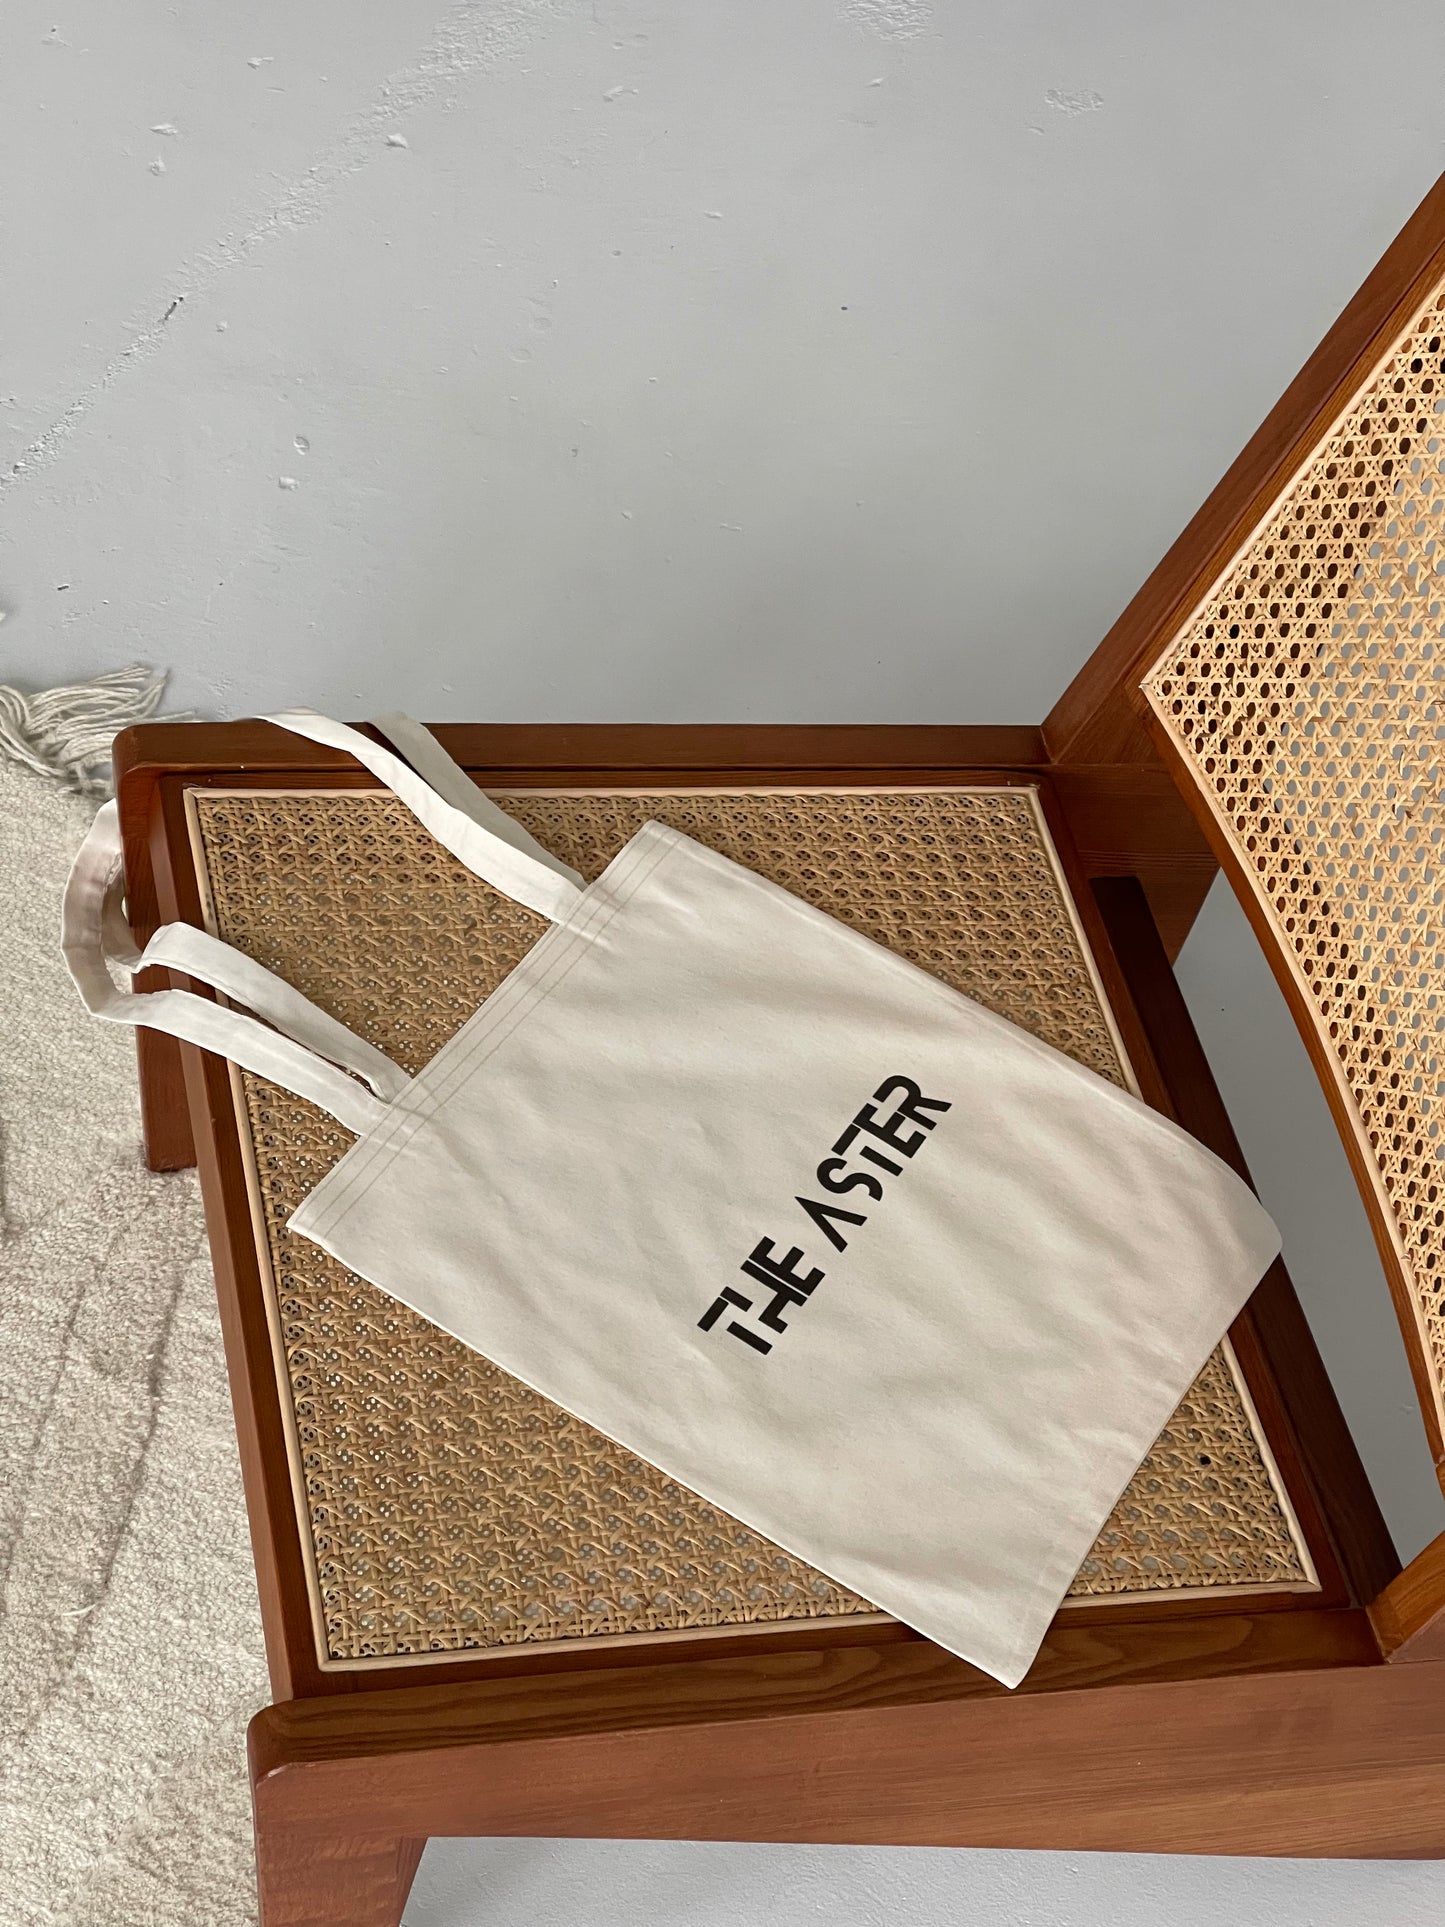 Tote bag "Shakespeare and Company"